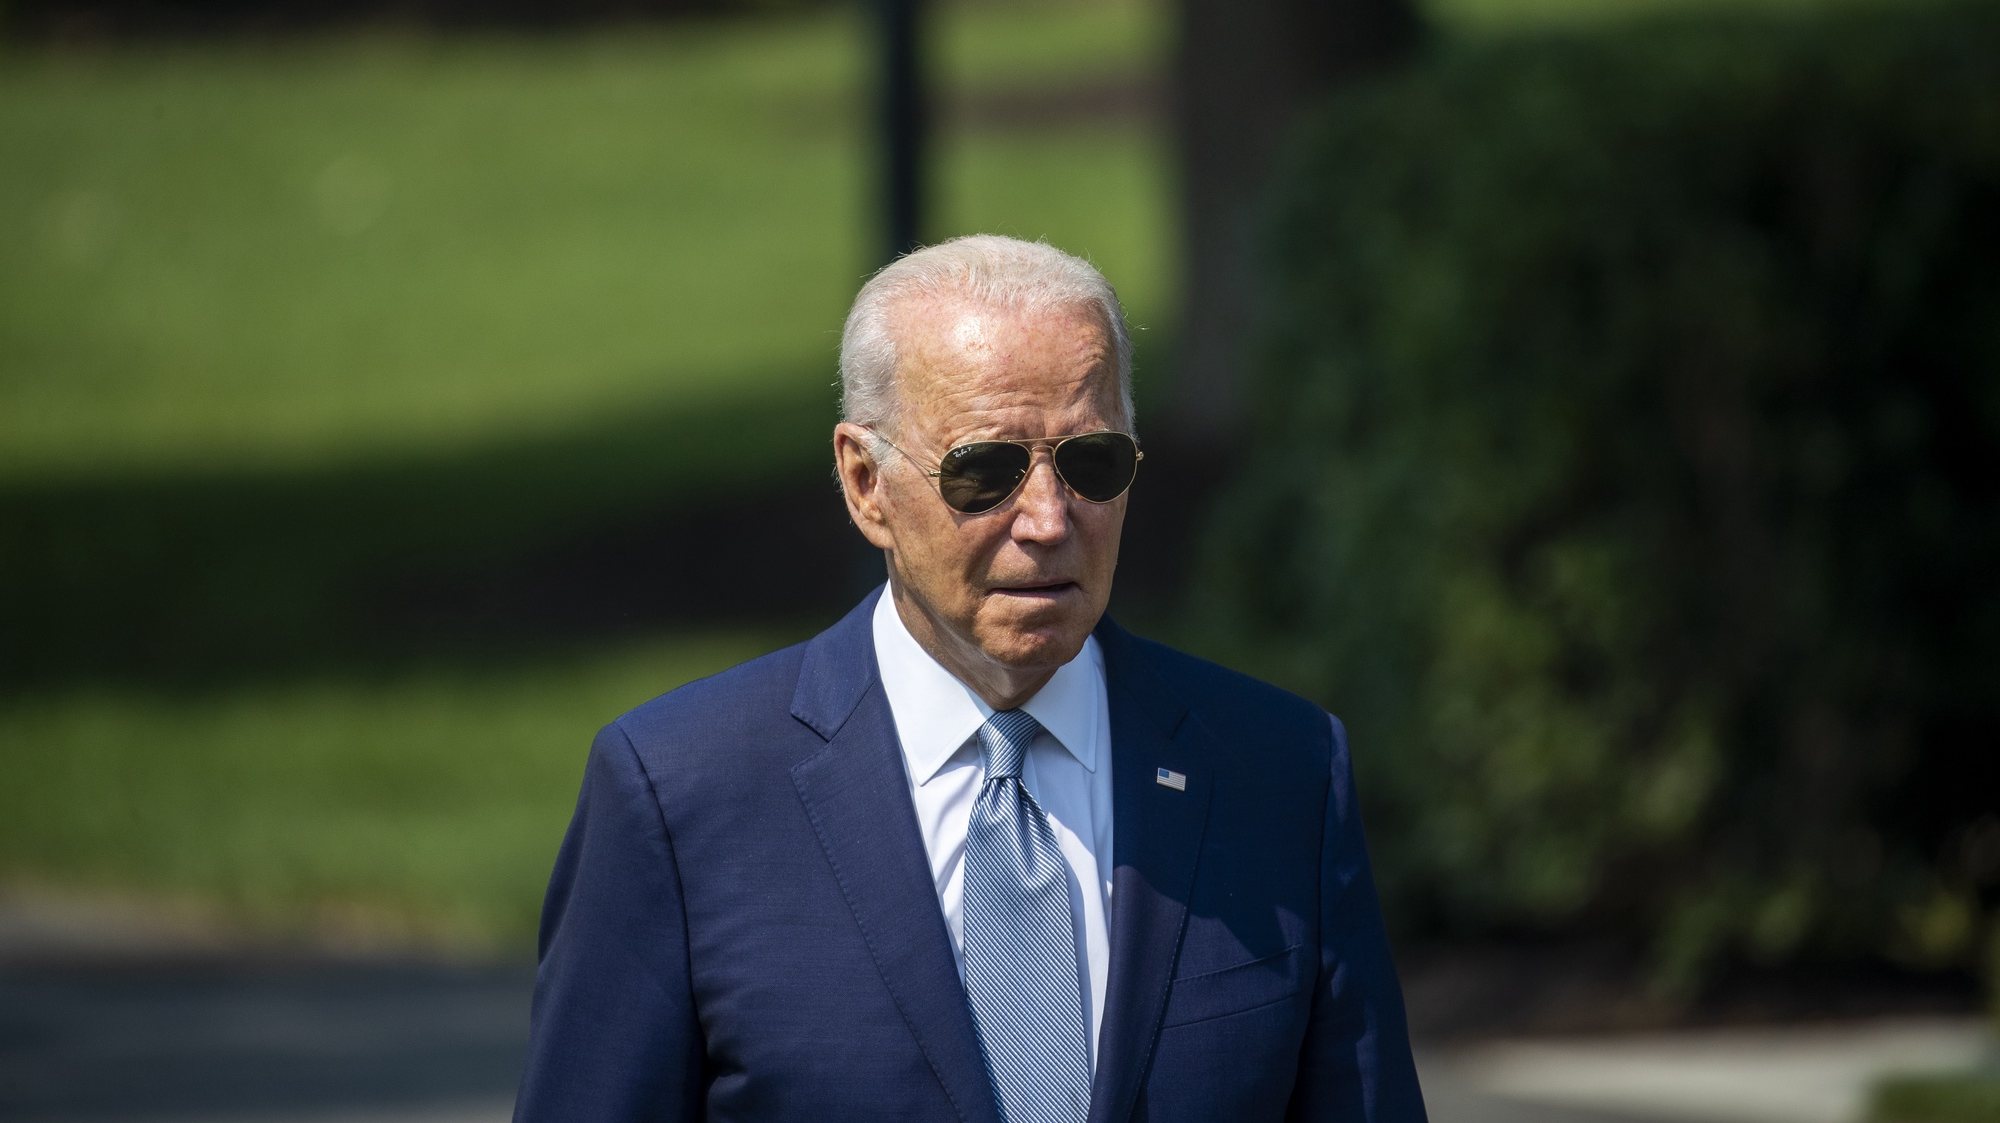 epa09328934 US President Joe Biden walks to board Marine One on the South Lawn of the White House in Washington, DC, USA, 07 July 2021. President Biden is traveling to Crystal Lake, Illinois, to participate in an infrastructure event at McHenry County College.  EPA/SHAWN THEW